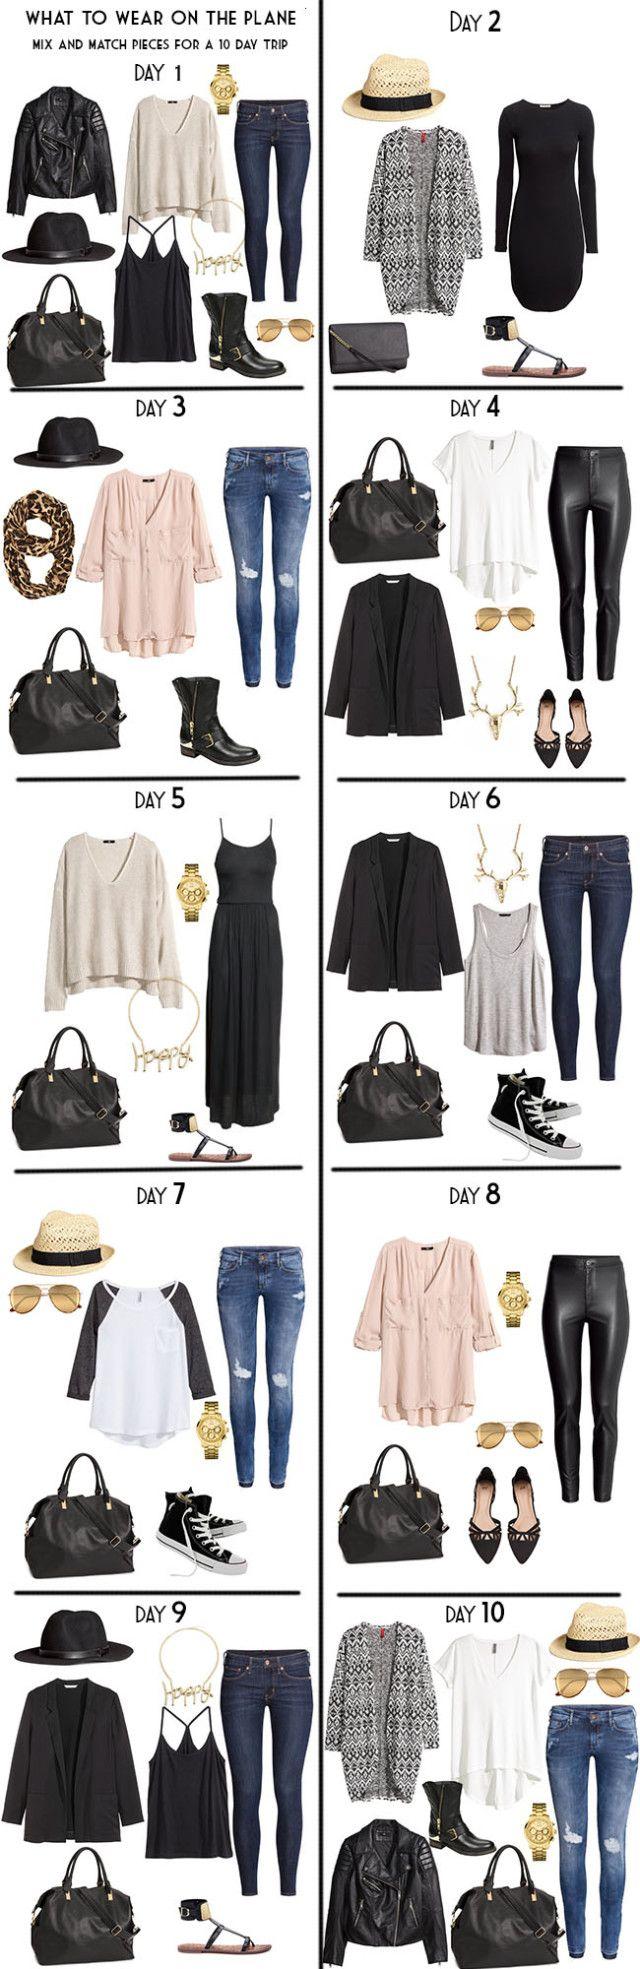 Wedding - 10 Day Packing List From Day To Night - Livelovesara